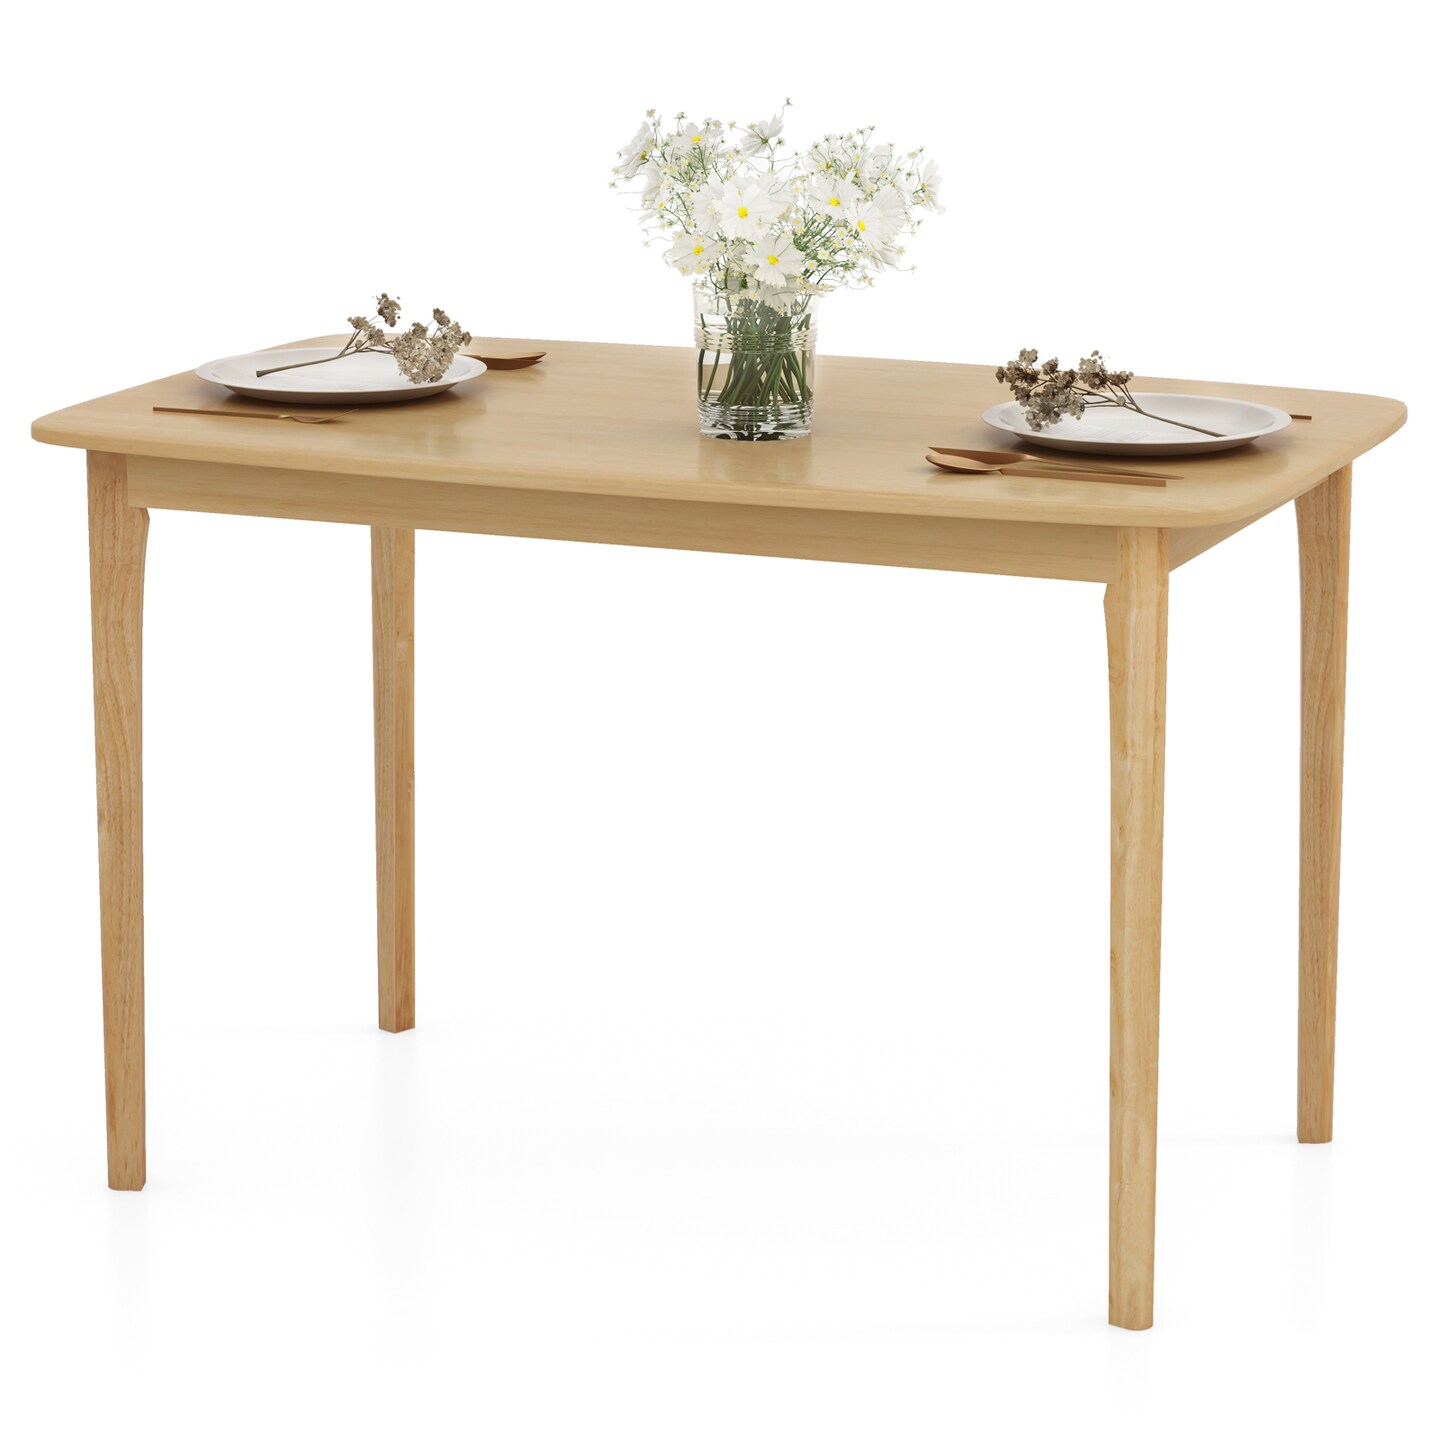 Solid Wood Dining Table With Rubber Wood Supporting Legs For Kitchen Dining Room